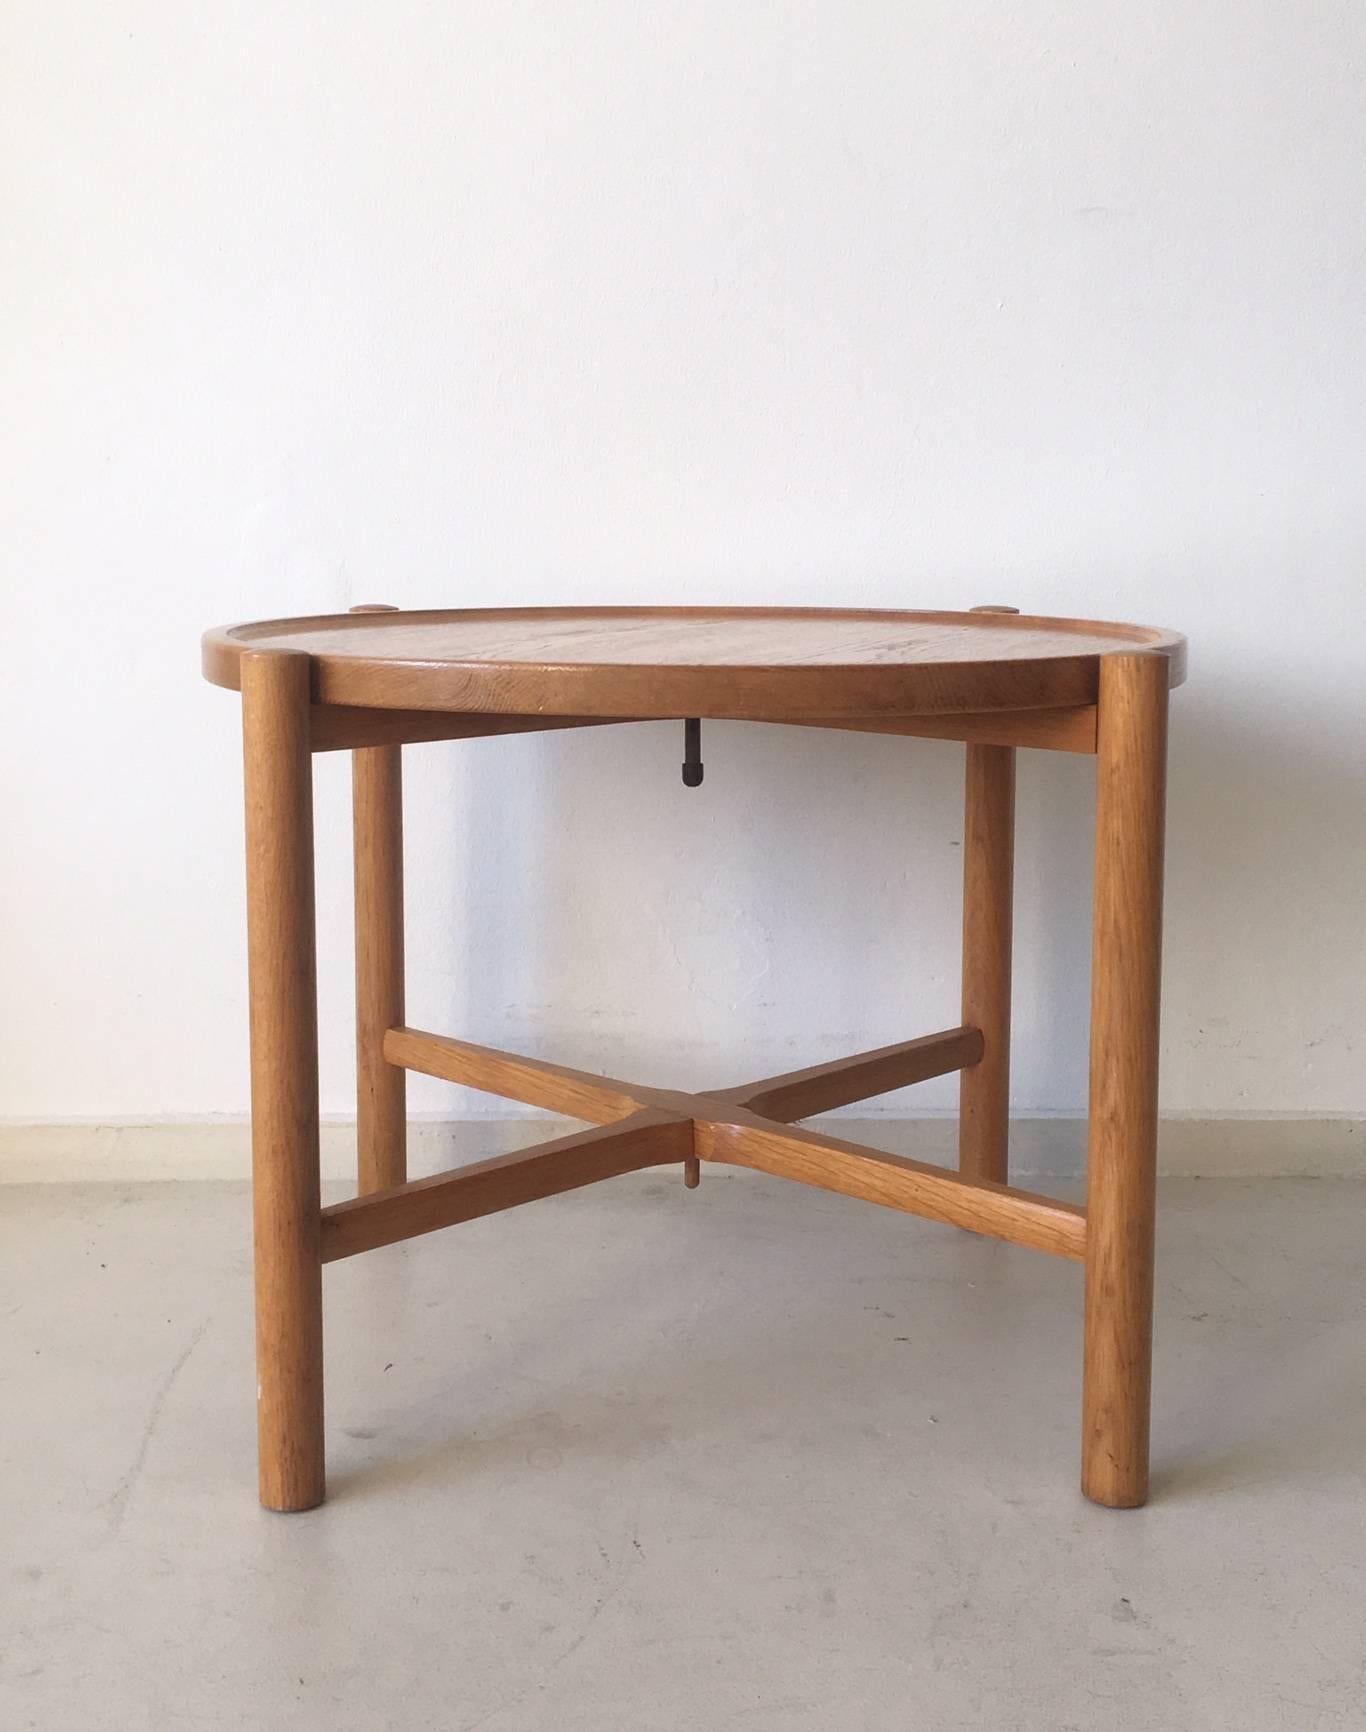 This foldable table was designed by Hans Wegner in 1945 for Andreas Tuck. In 1973 the production was taken over by PP Mobler. It's moest wooden tray is unattached, so could be reversed or replaced. Also an Additional Tray can be placed on the lower